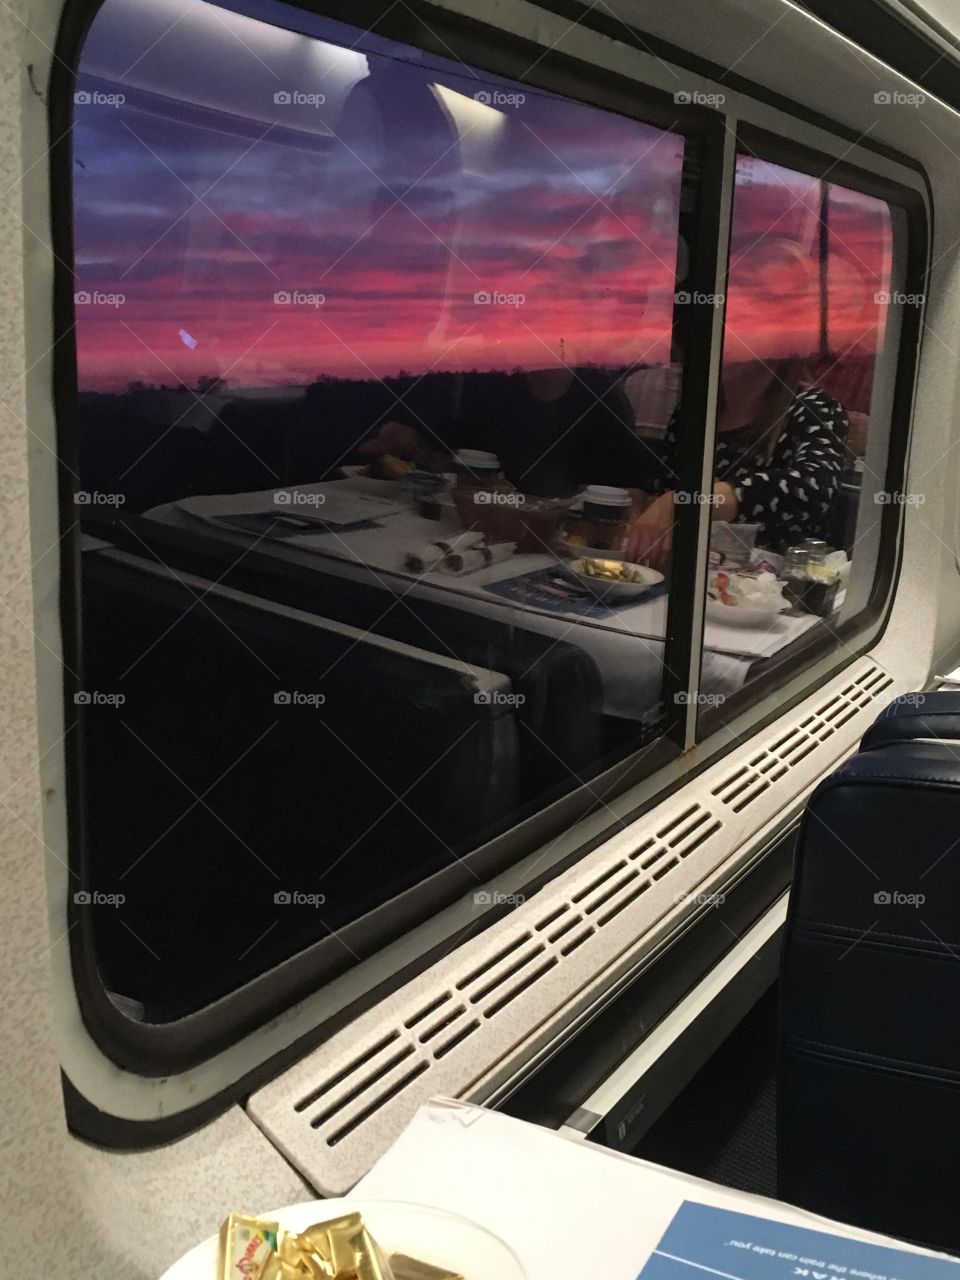 Train ride to Chicago on vacation! Beautiful sunrise!